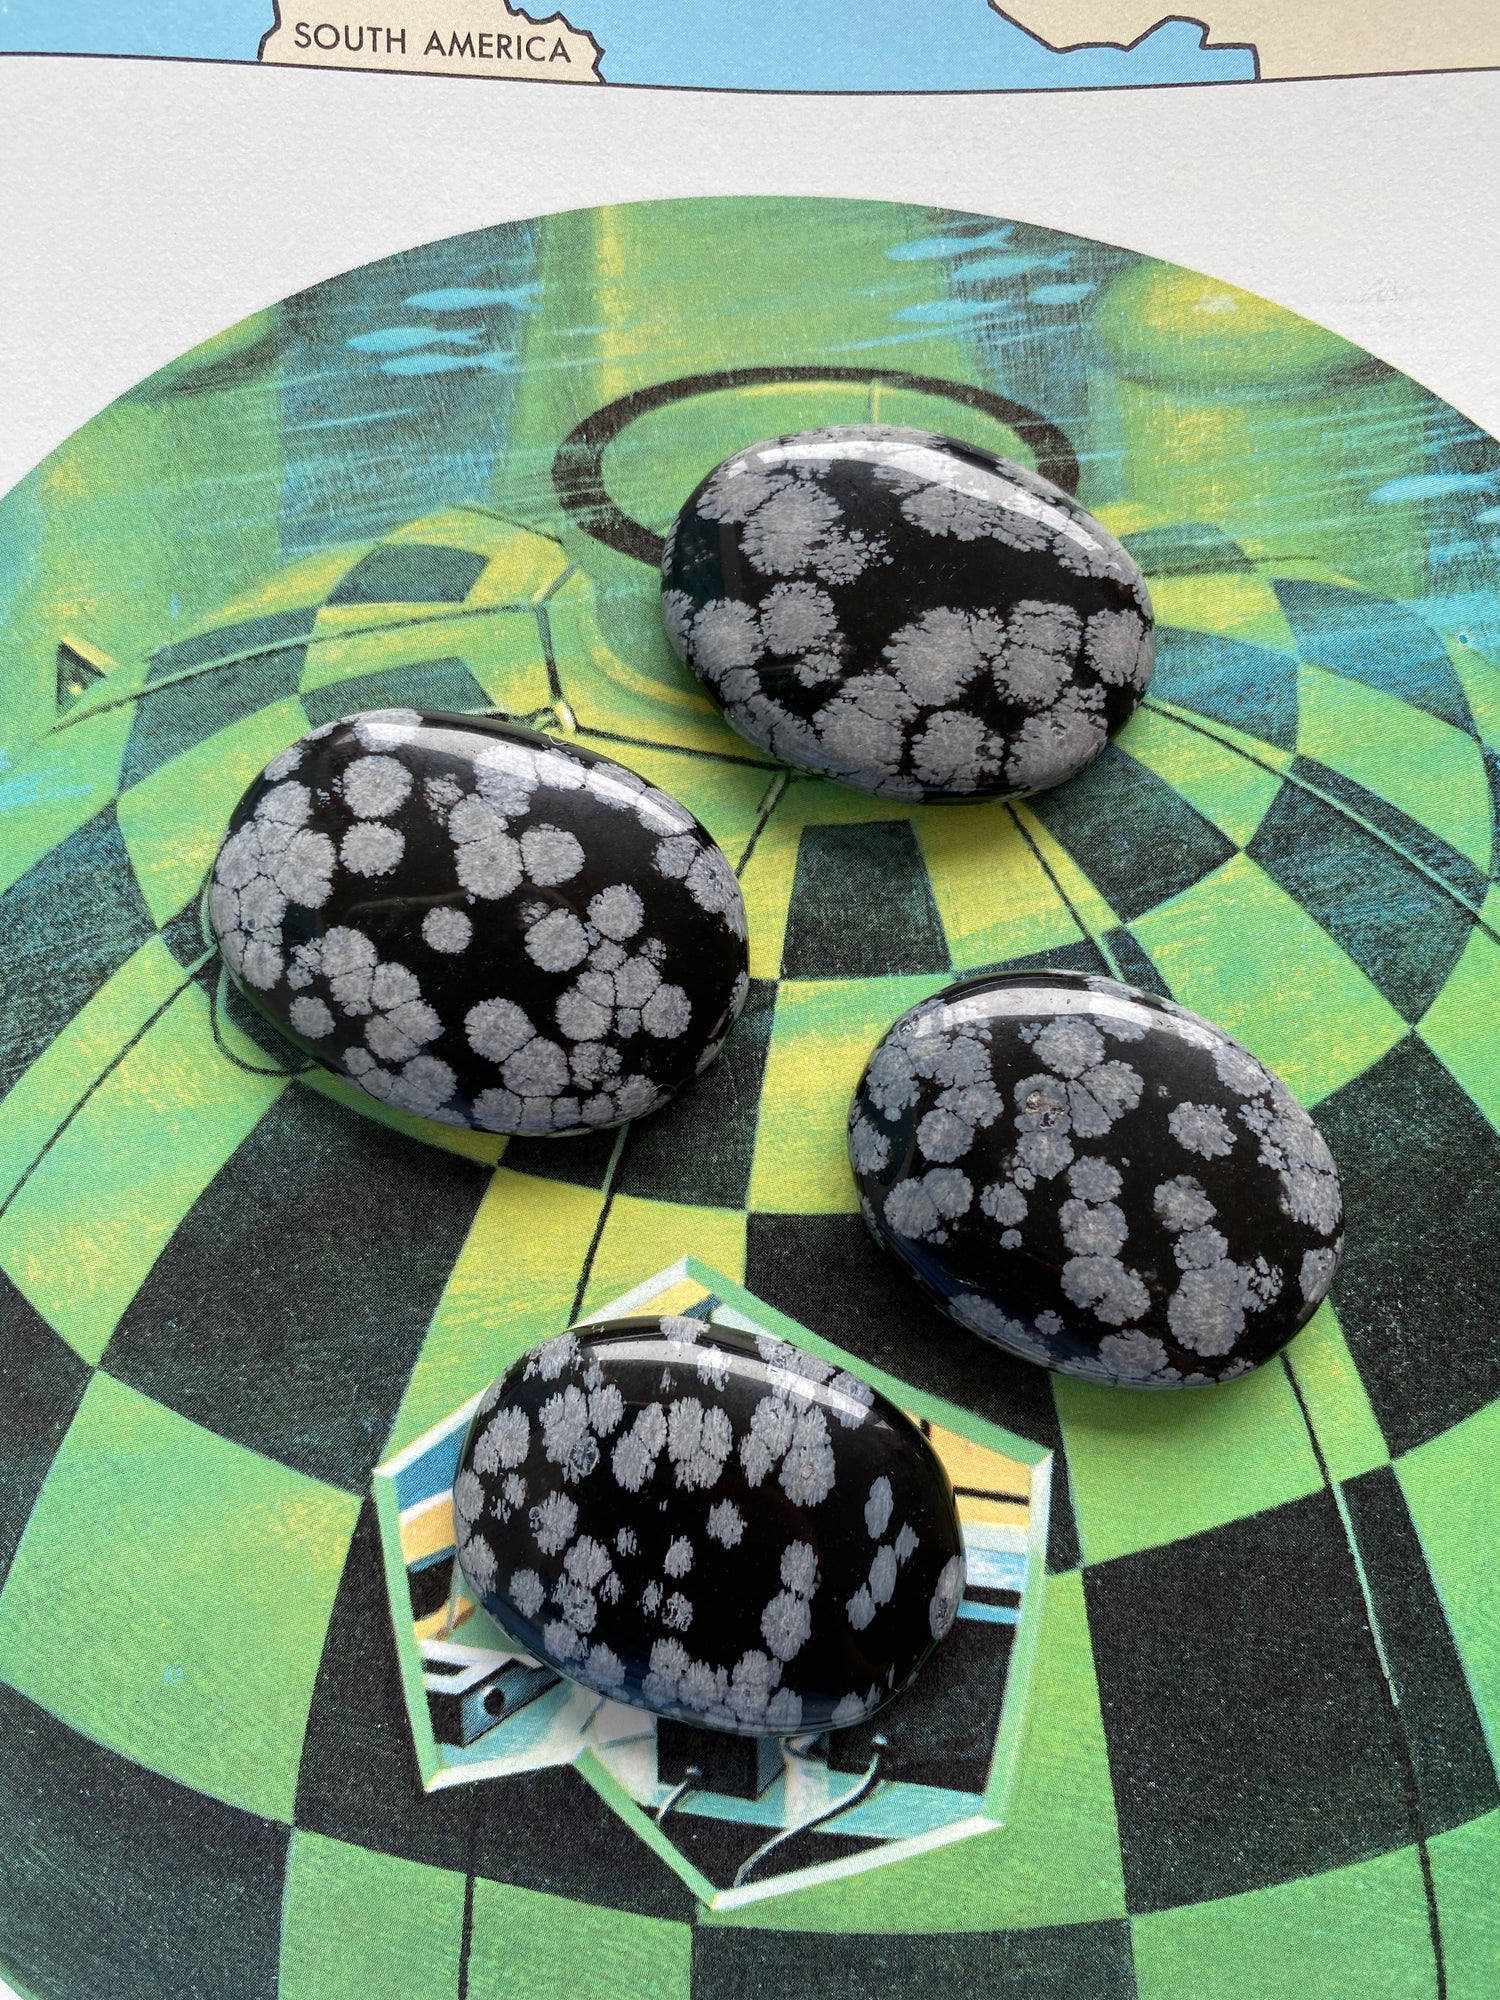 Snowflake Obsidian Worry Stone - Moon Room Shop and Wellness